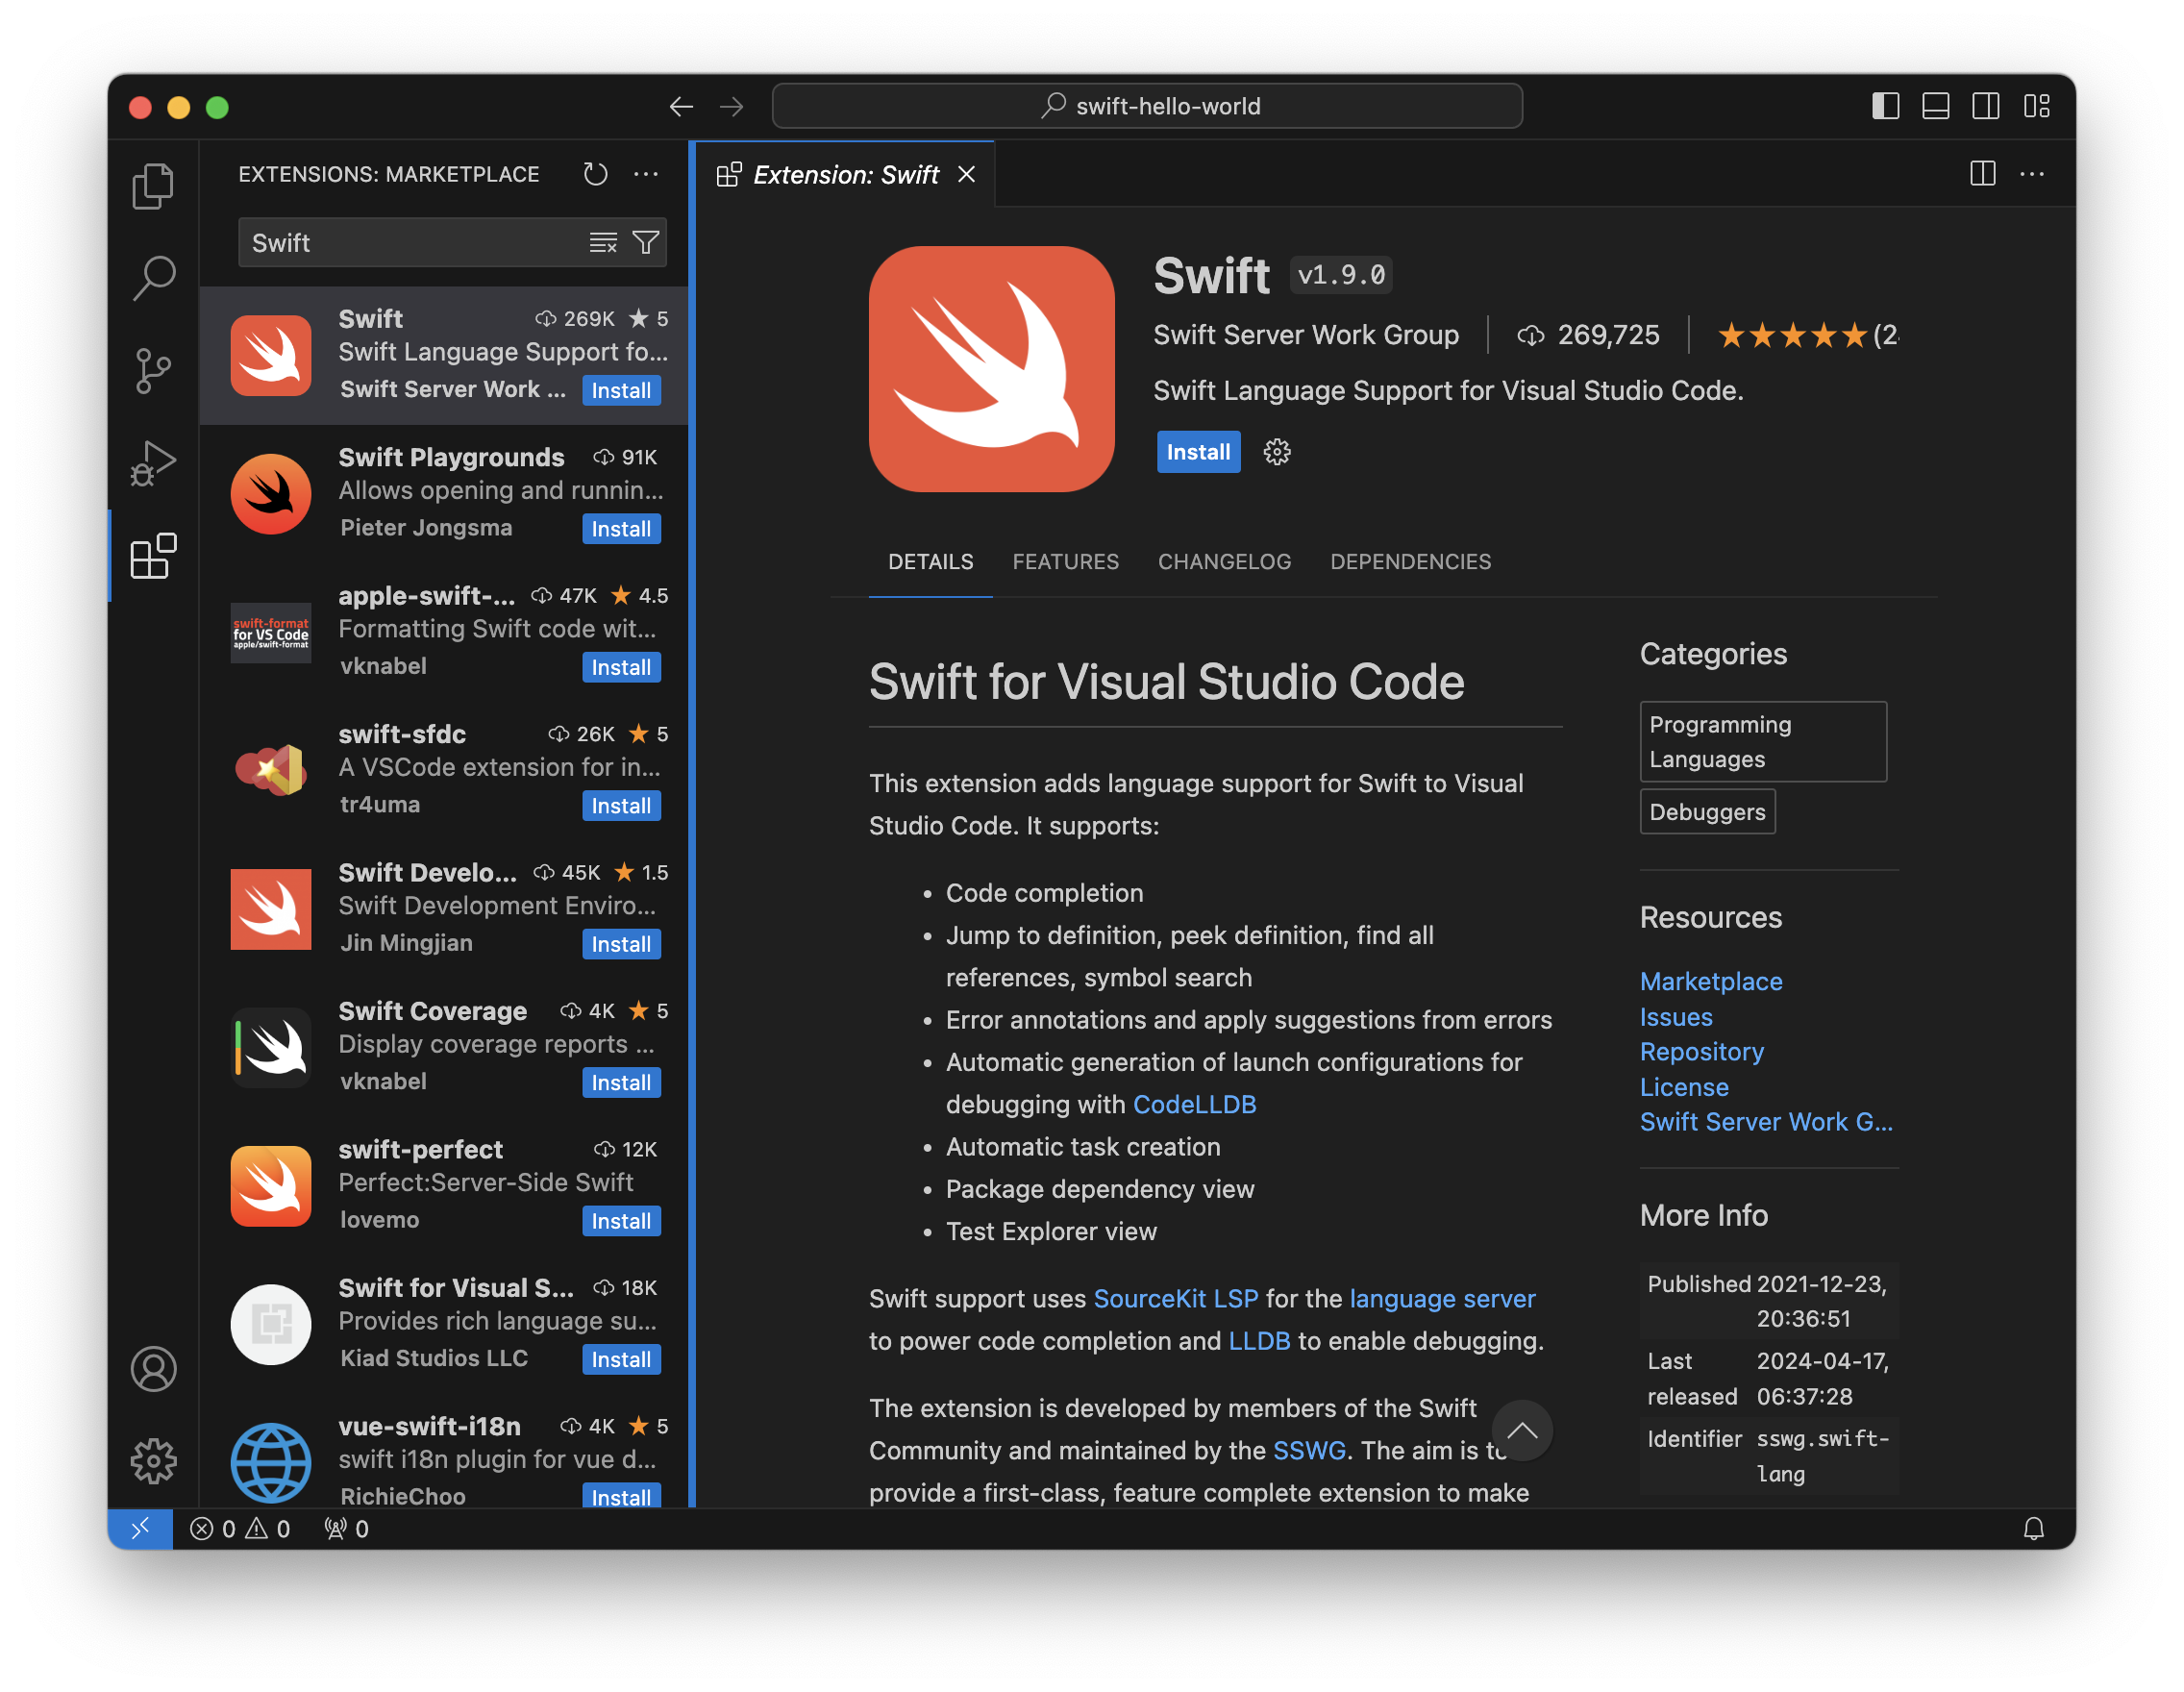 Installing the vscode-swift extension from the extensions pane